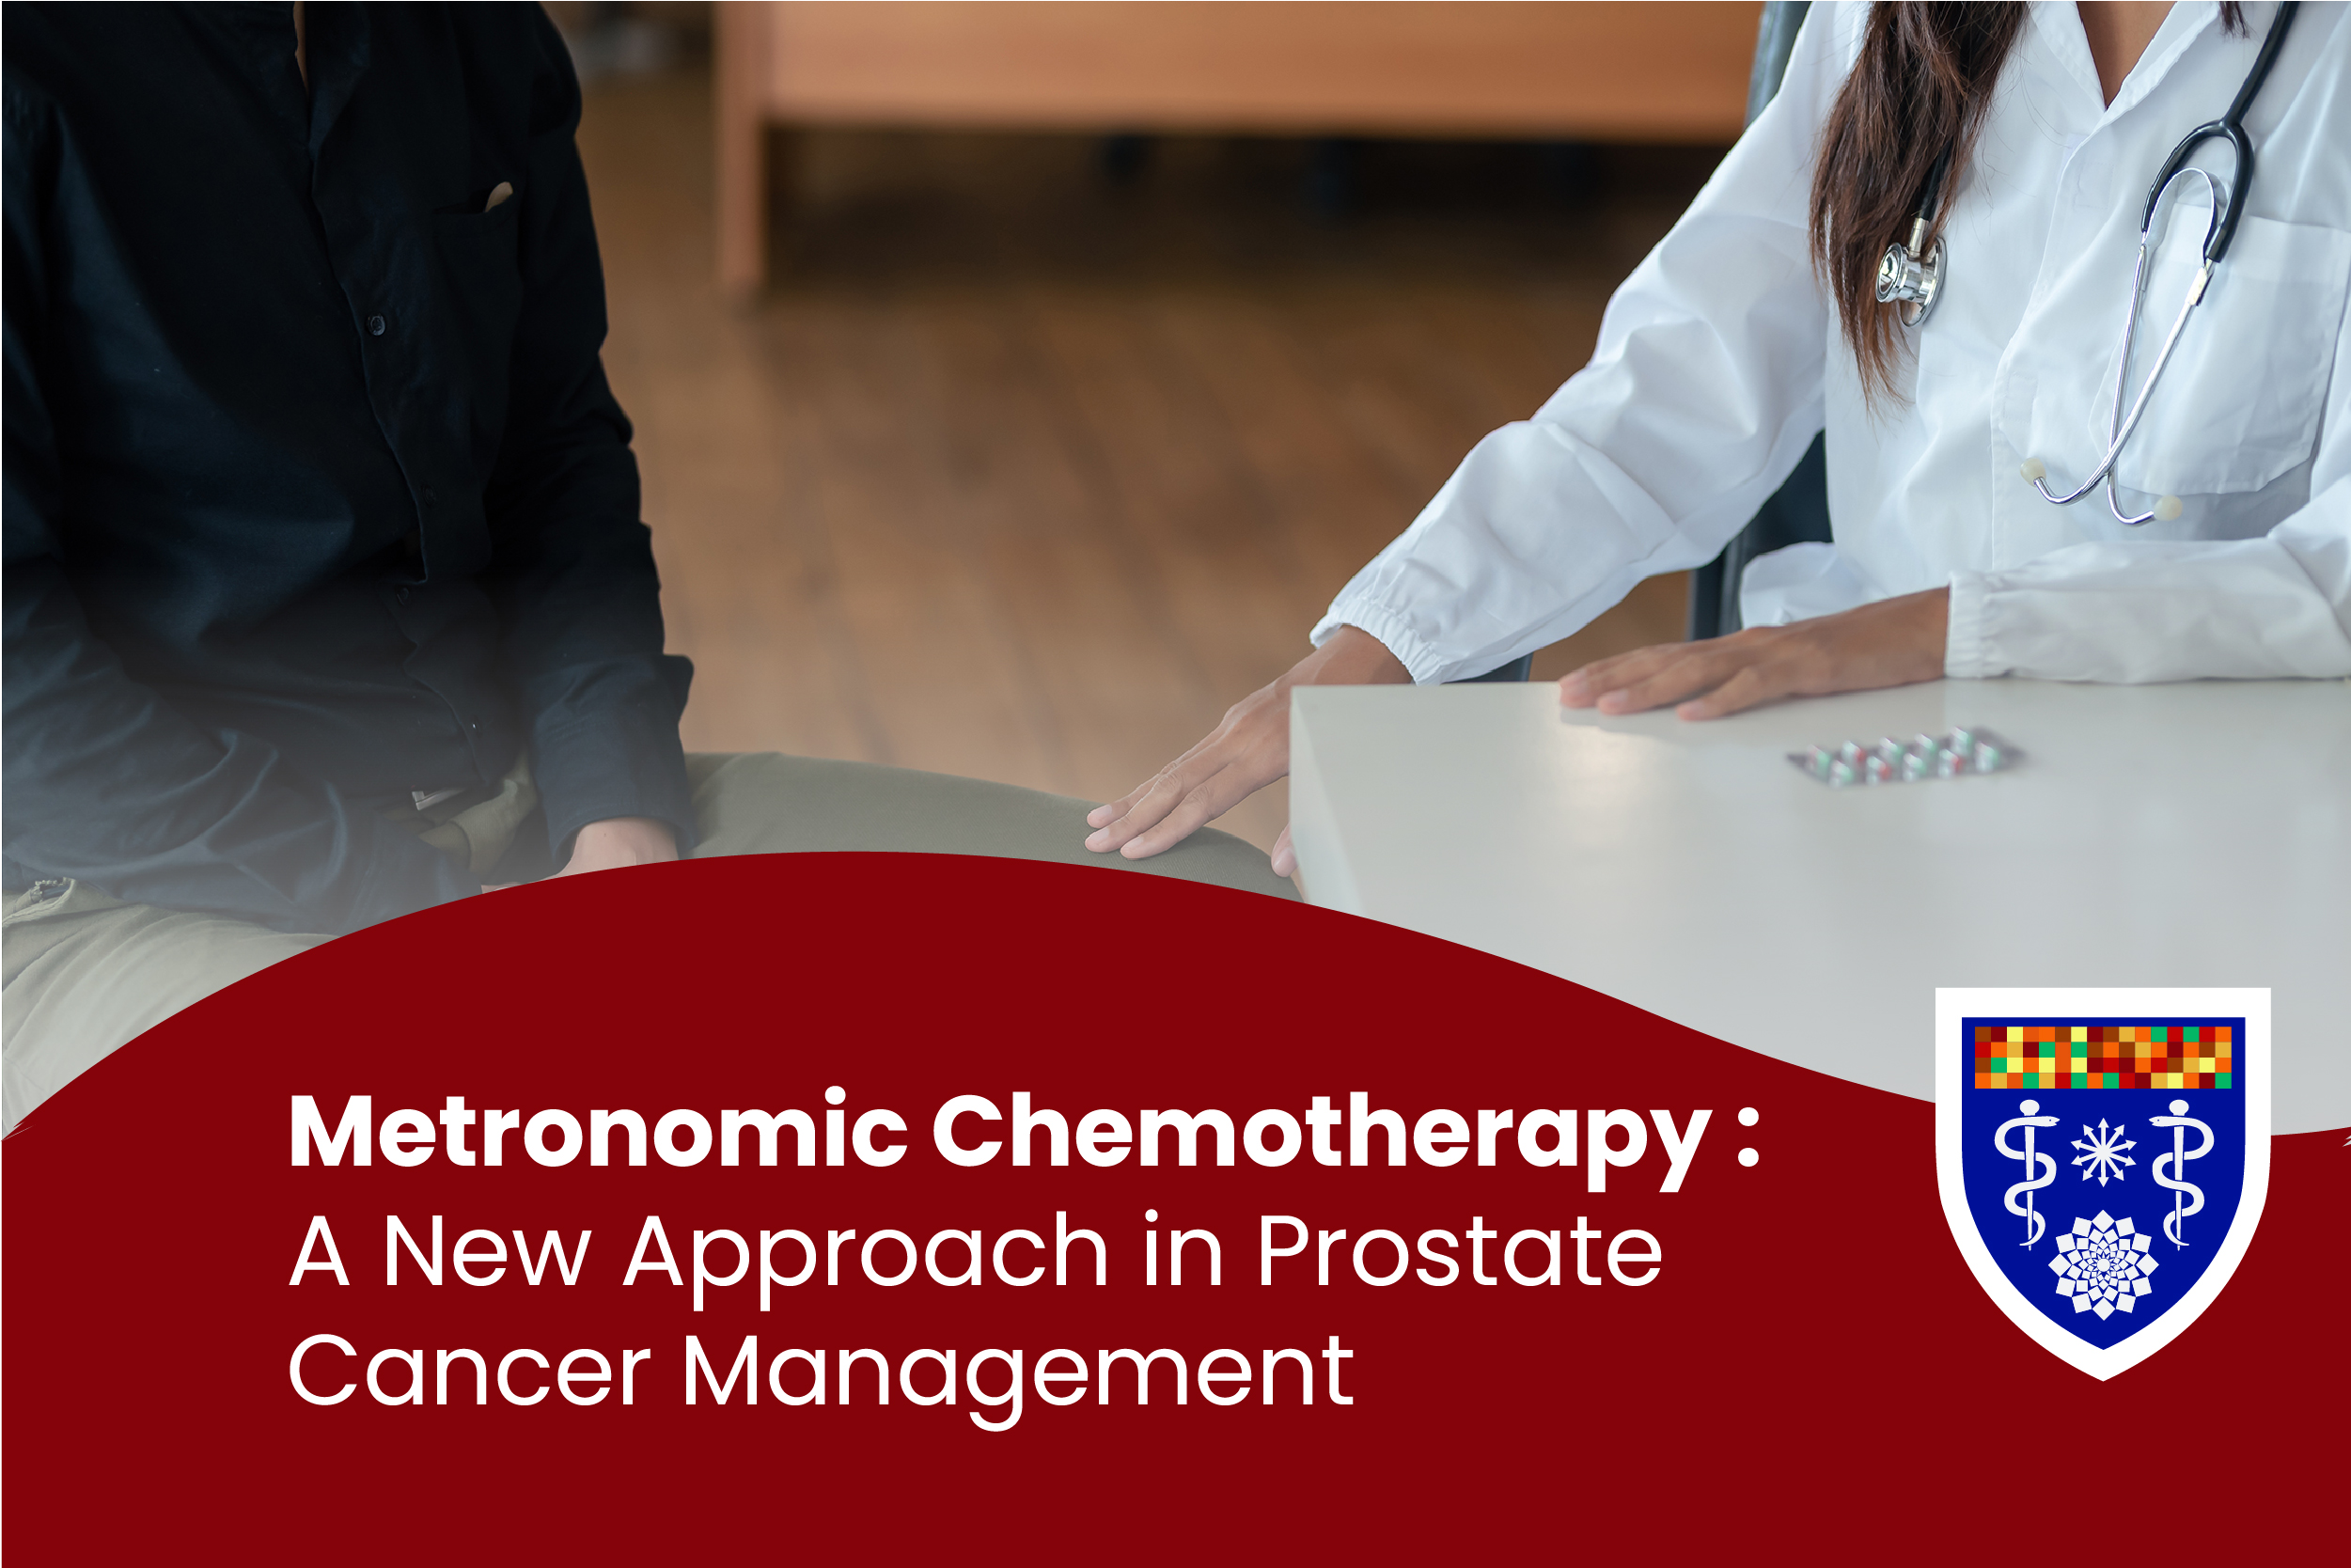 You are currently viewing Metronomic Chemotherapy: A New Approach in Prostate Cancer Management